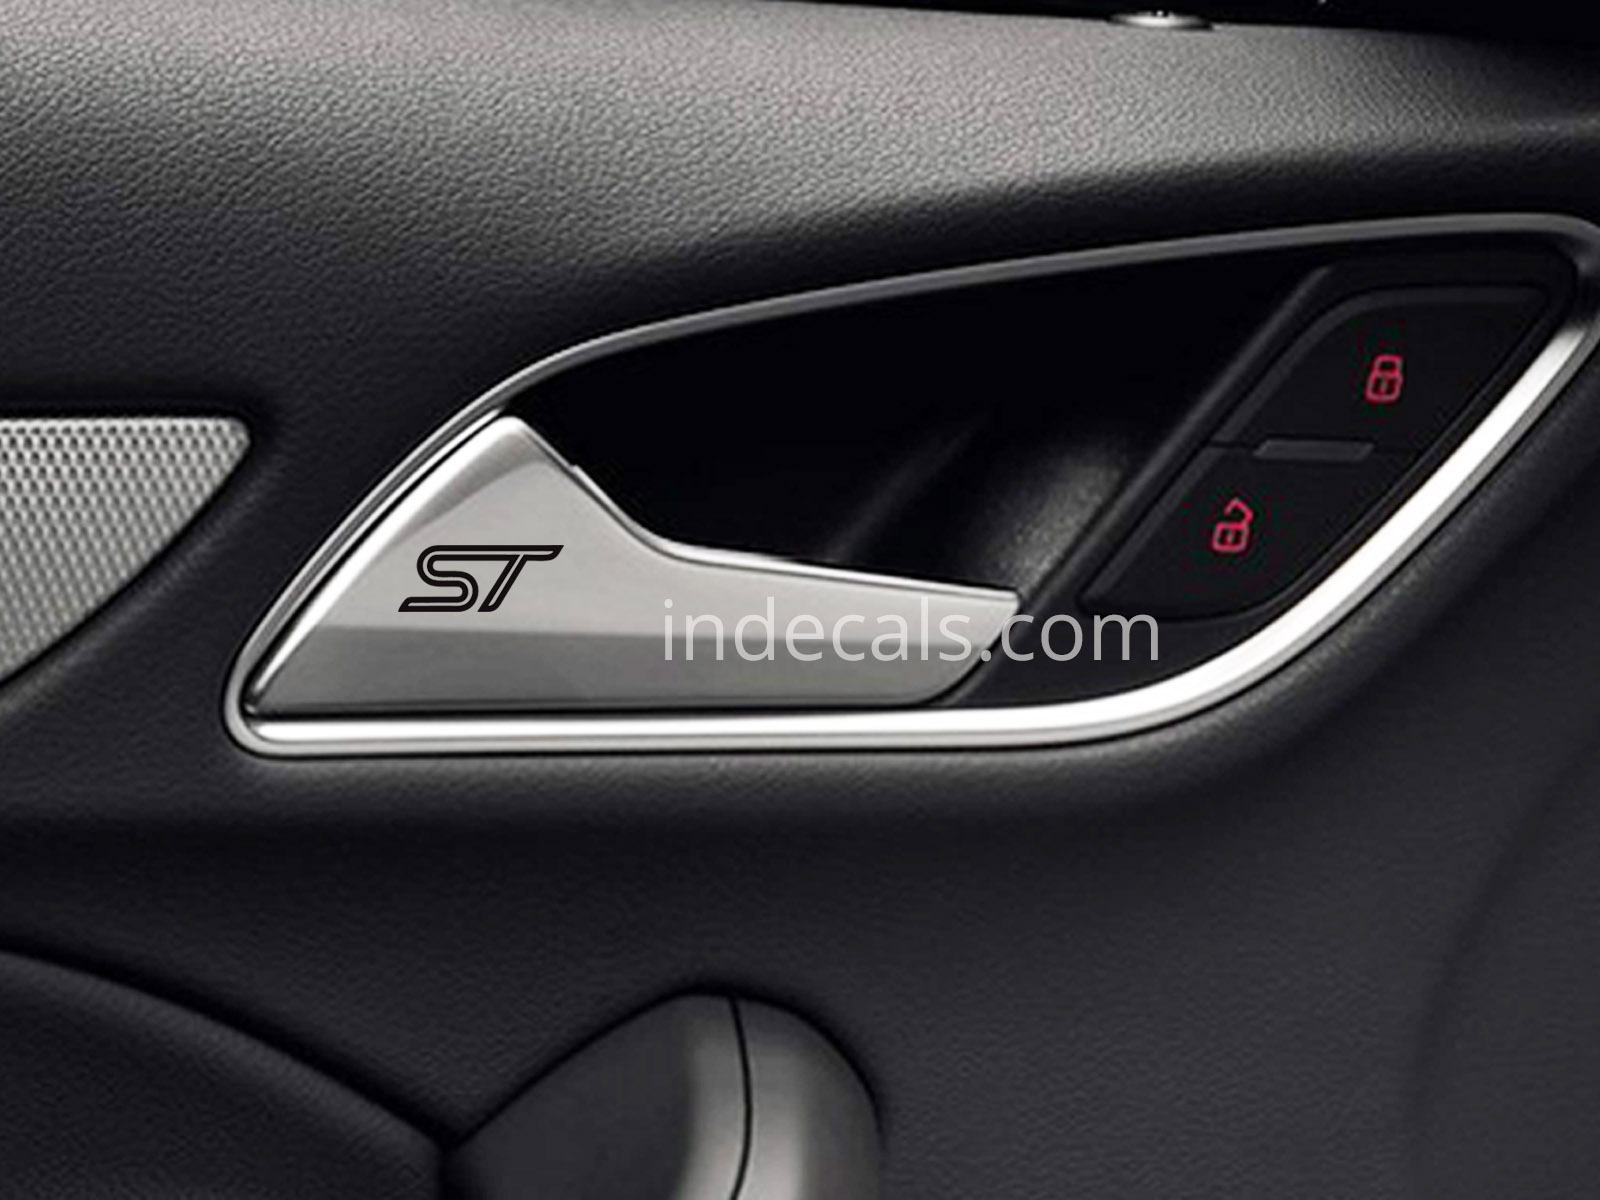 6 x Ford ST Stickers for Door Handle - Black